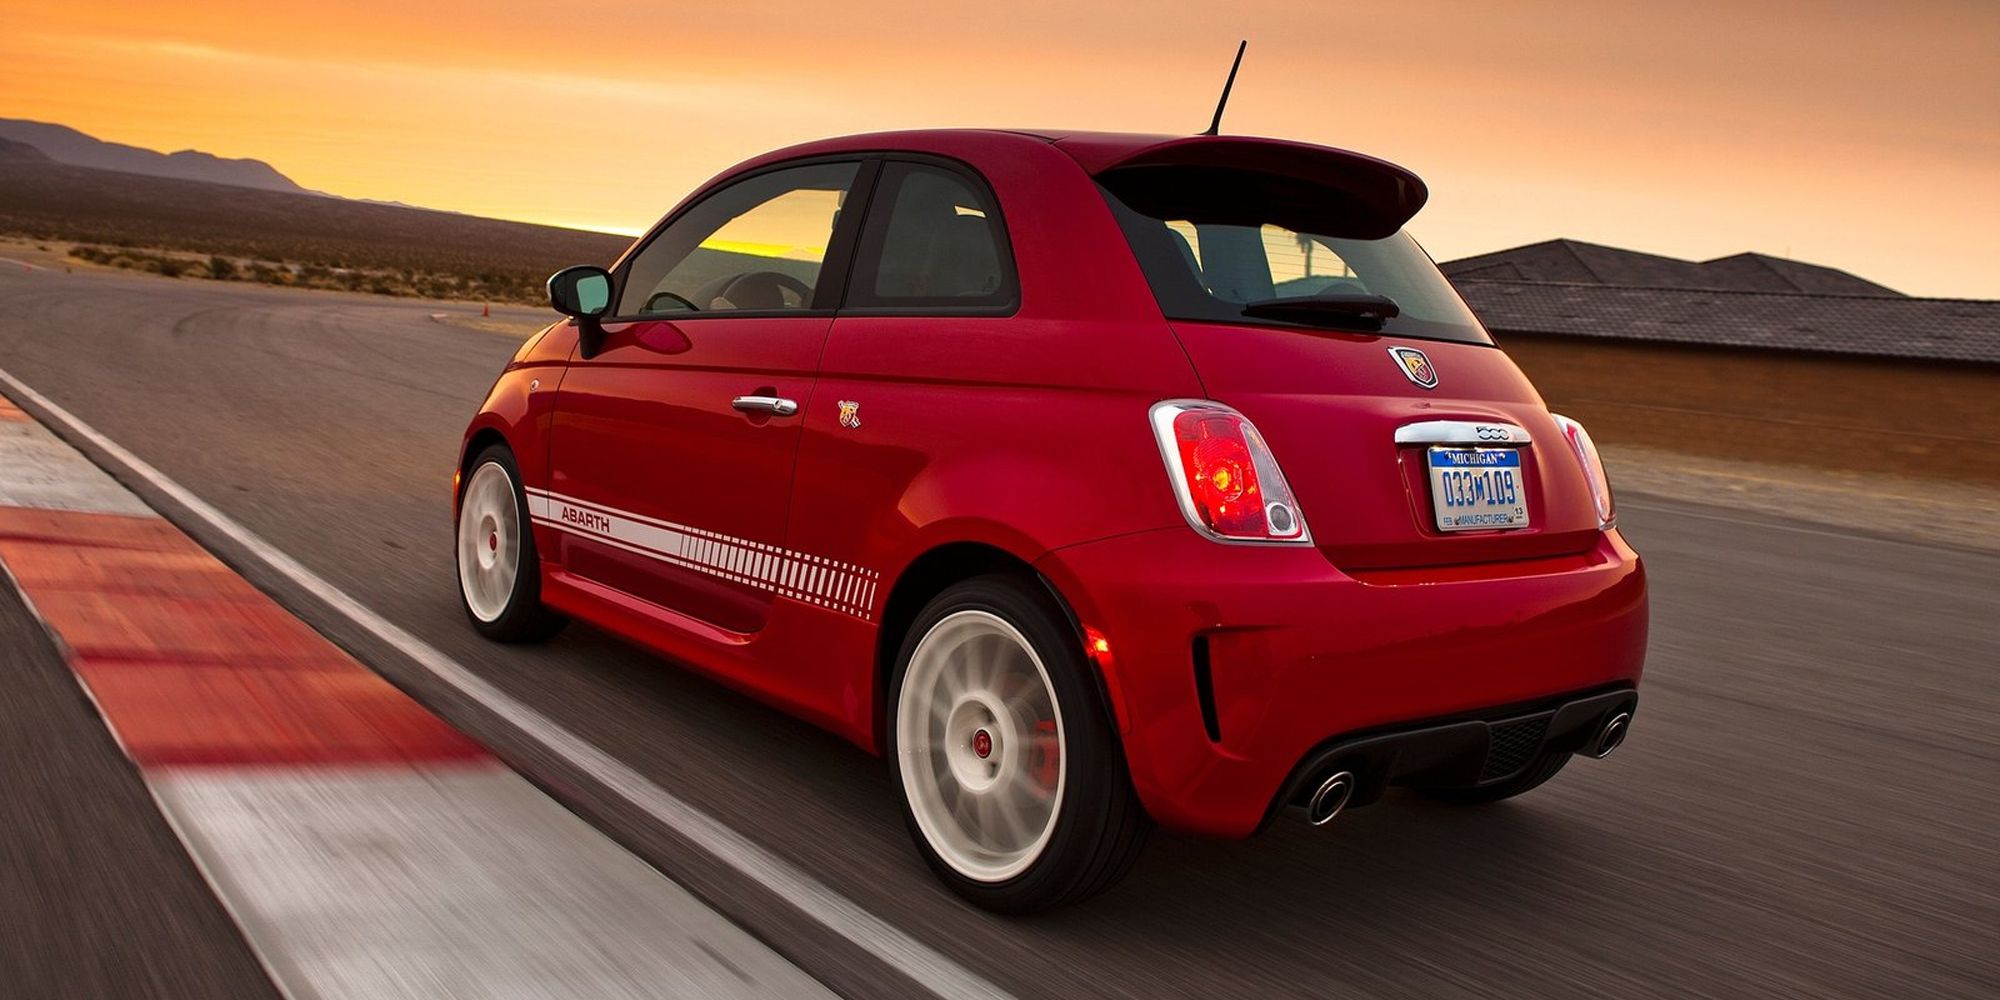 Rear 3/4 view of the Abarth 500 in red